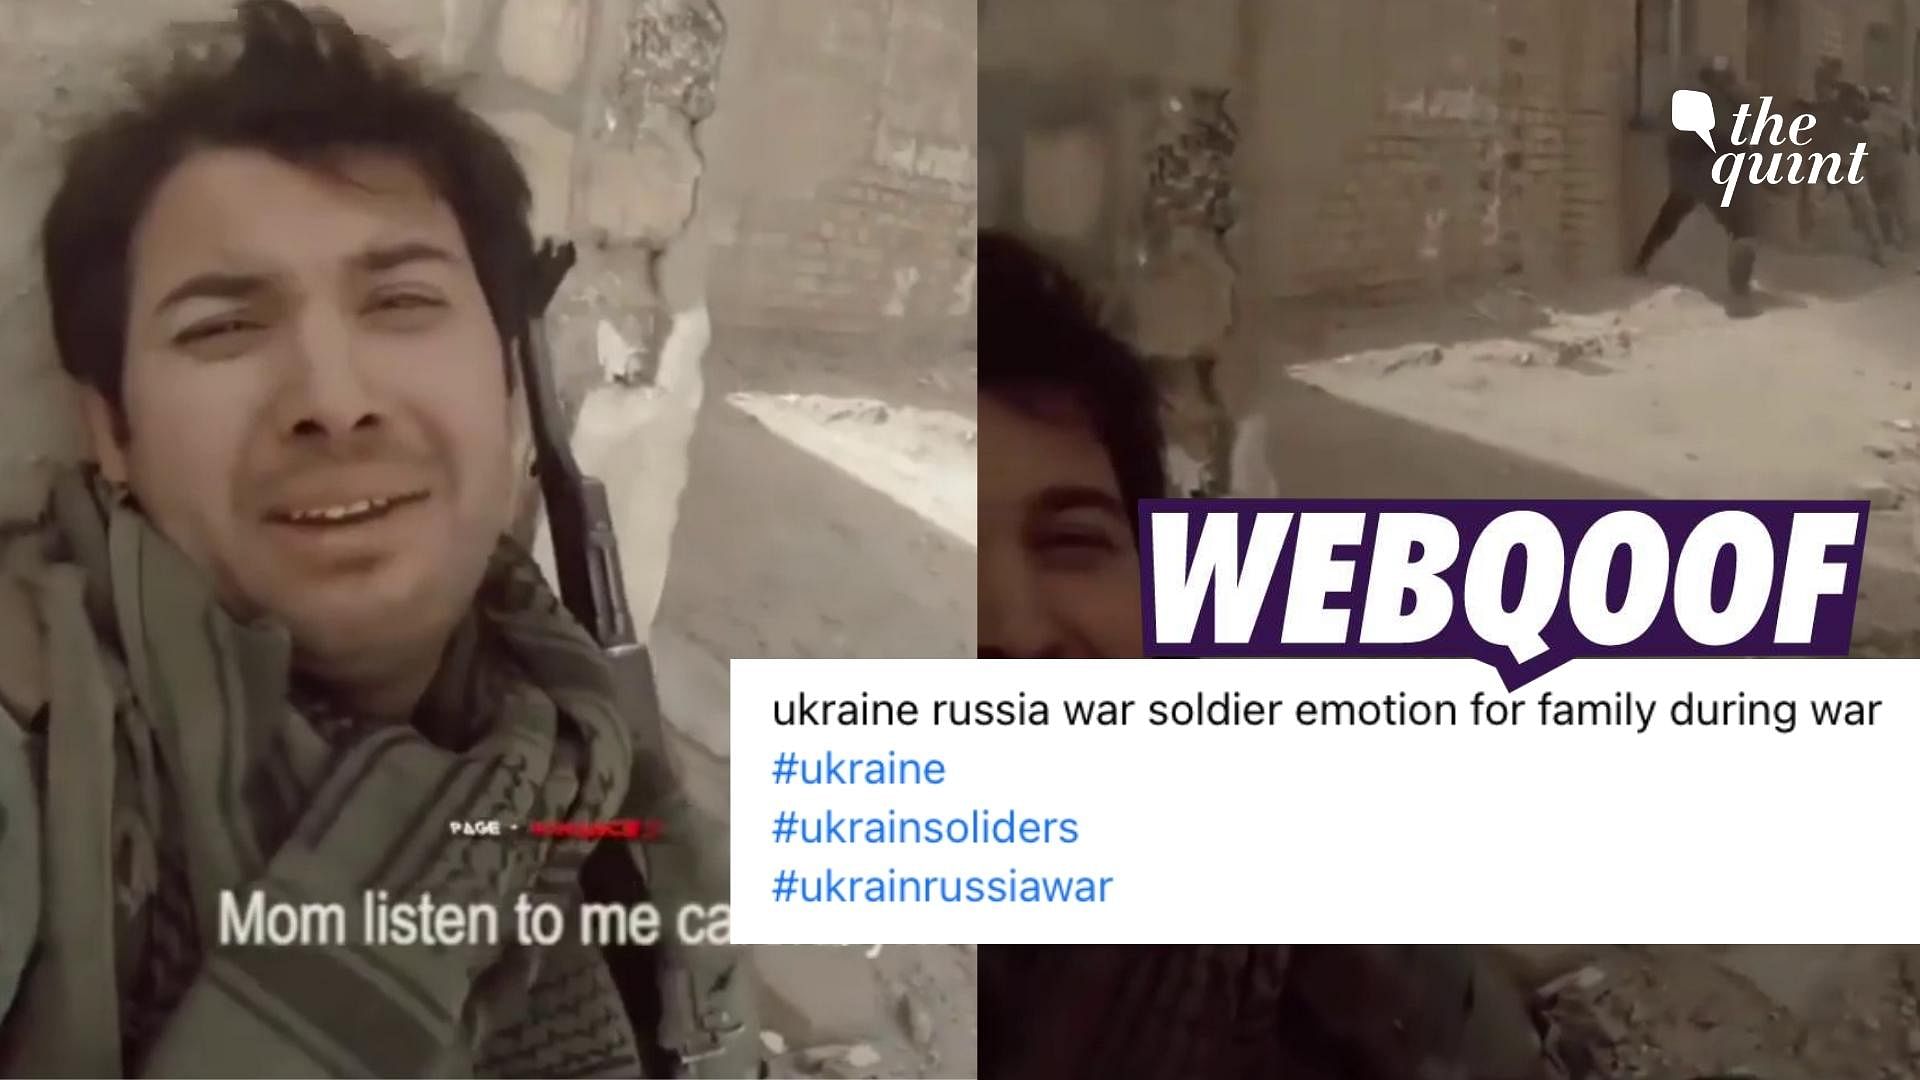 <div class="paragraphs"><p>The claim states that it is a real video of an emotional soldier in the Ukraine-Russia war.</p></div>